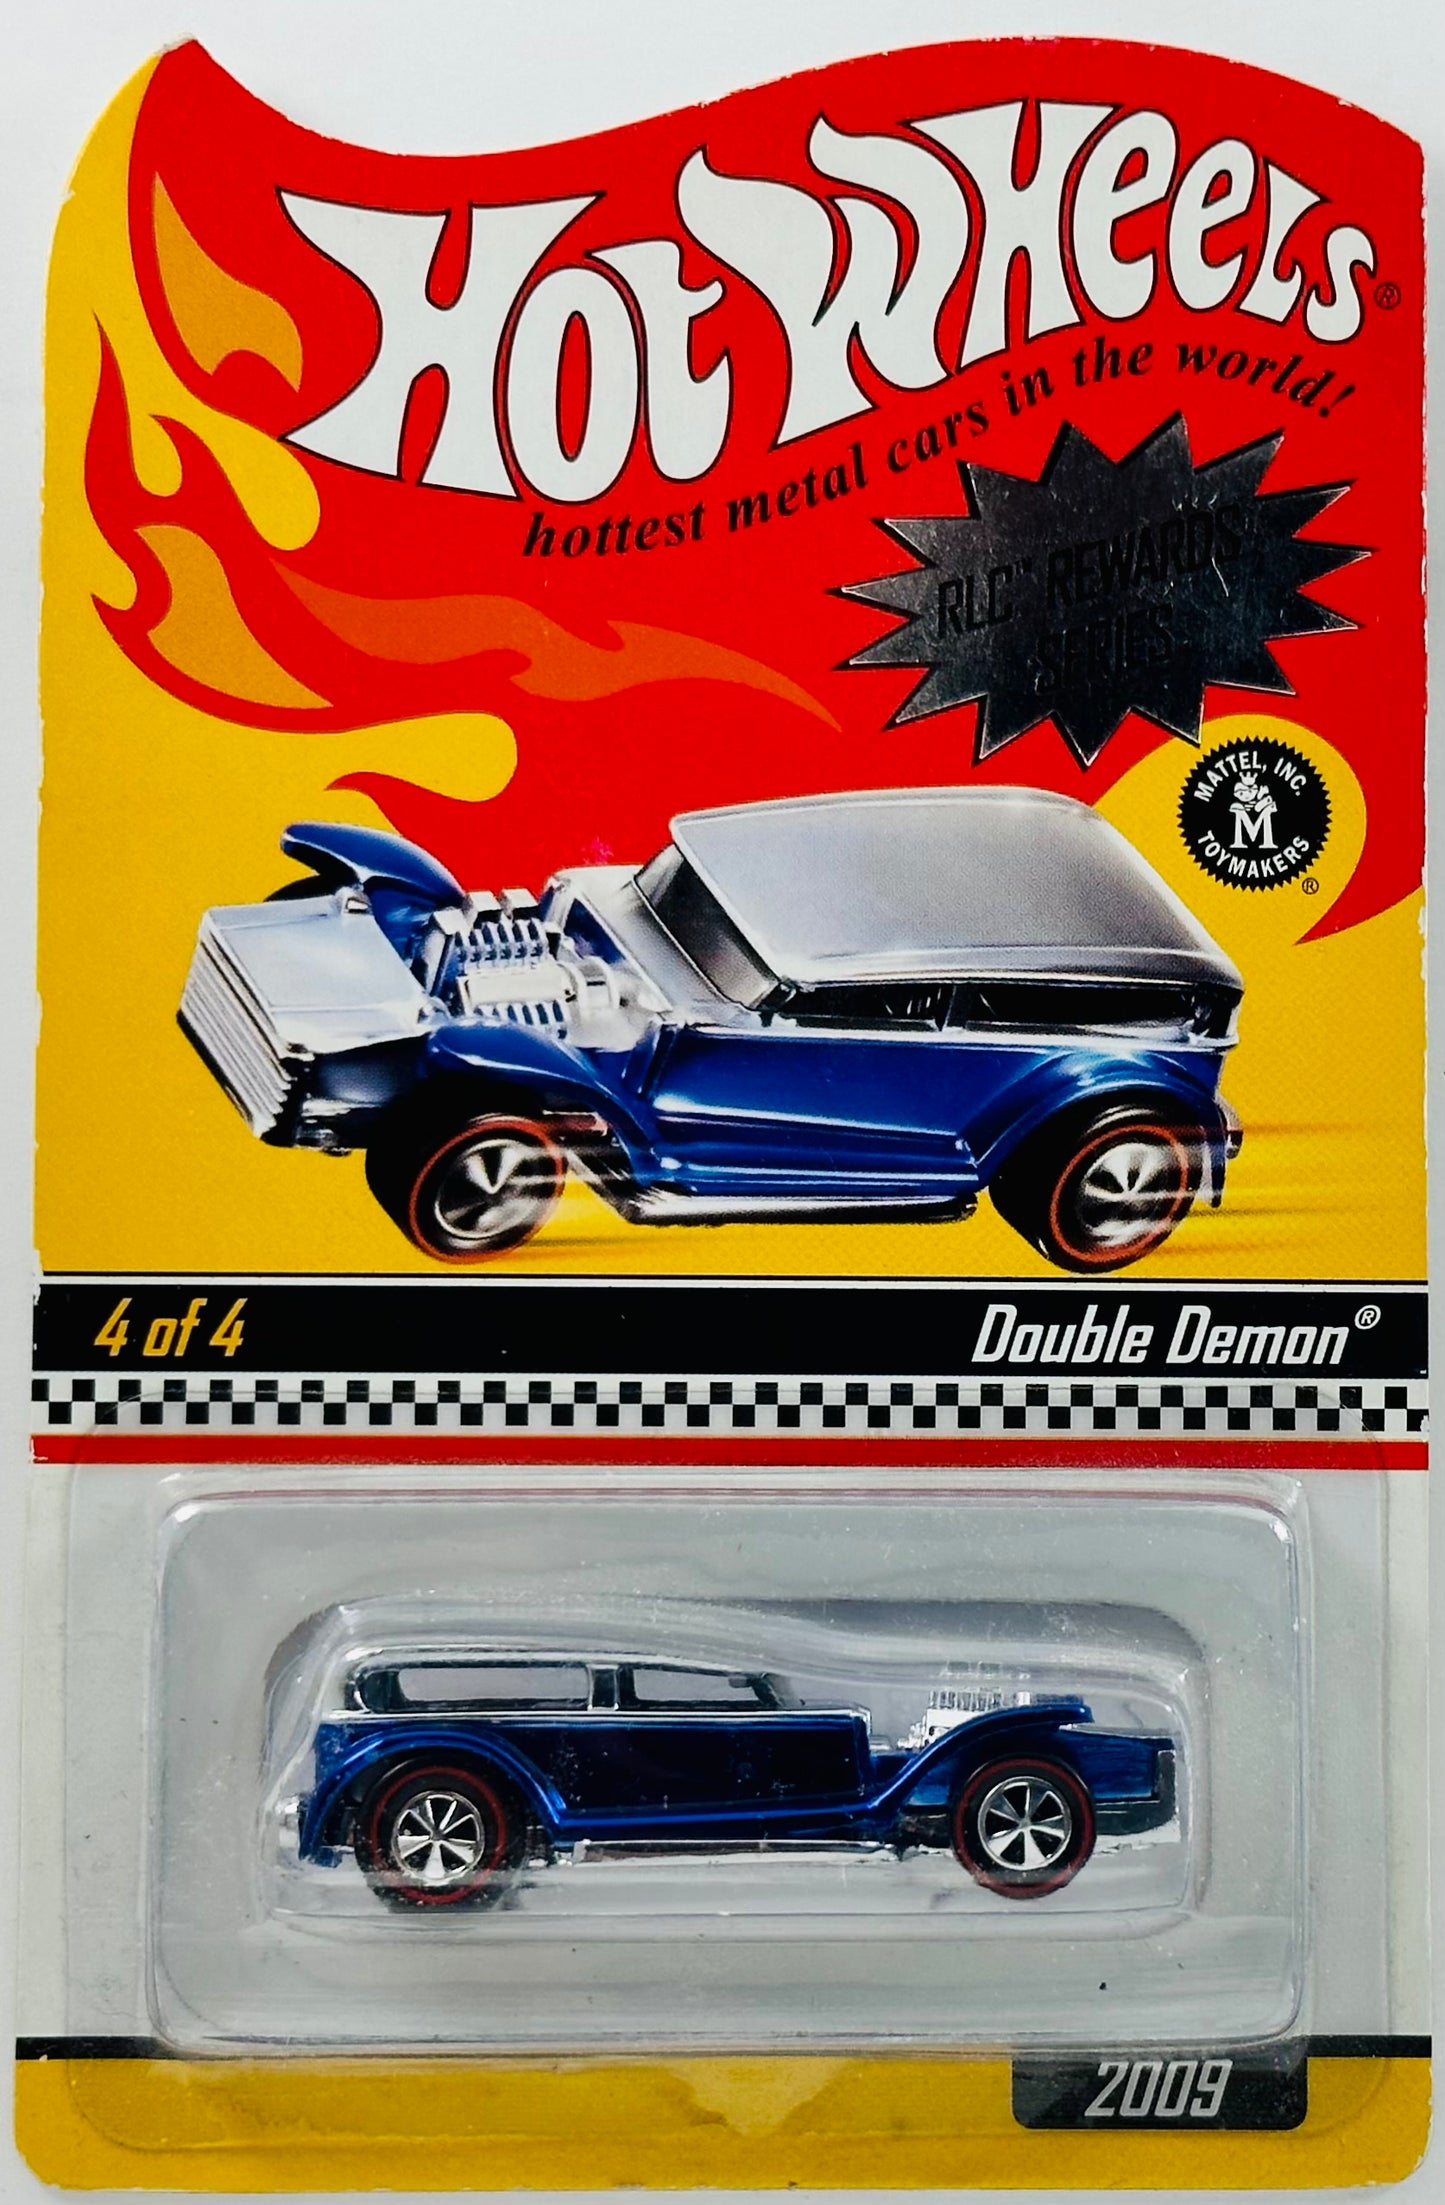 Hot Wheels 2009 - HWC / RLC Exclusive: Rewards # 4/4 - Double Demon - Spectraflame Racing Team Blue - Chrome Rooftop - Metal/Metal - Limited to 5,132